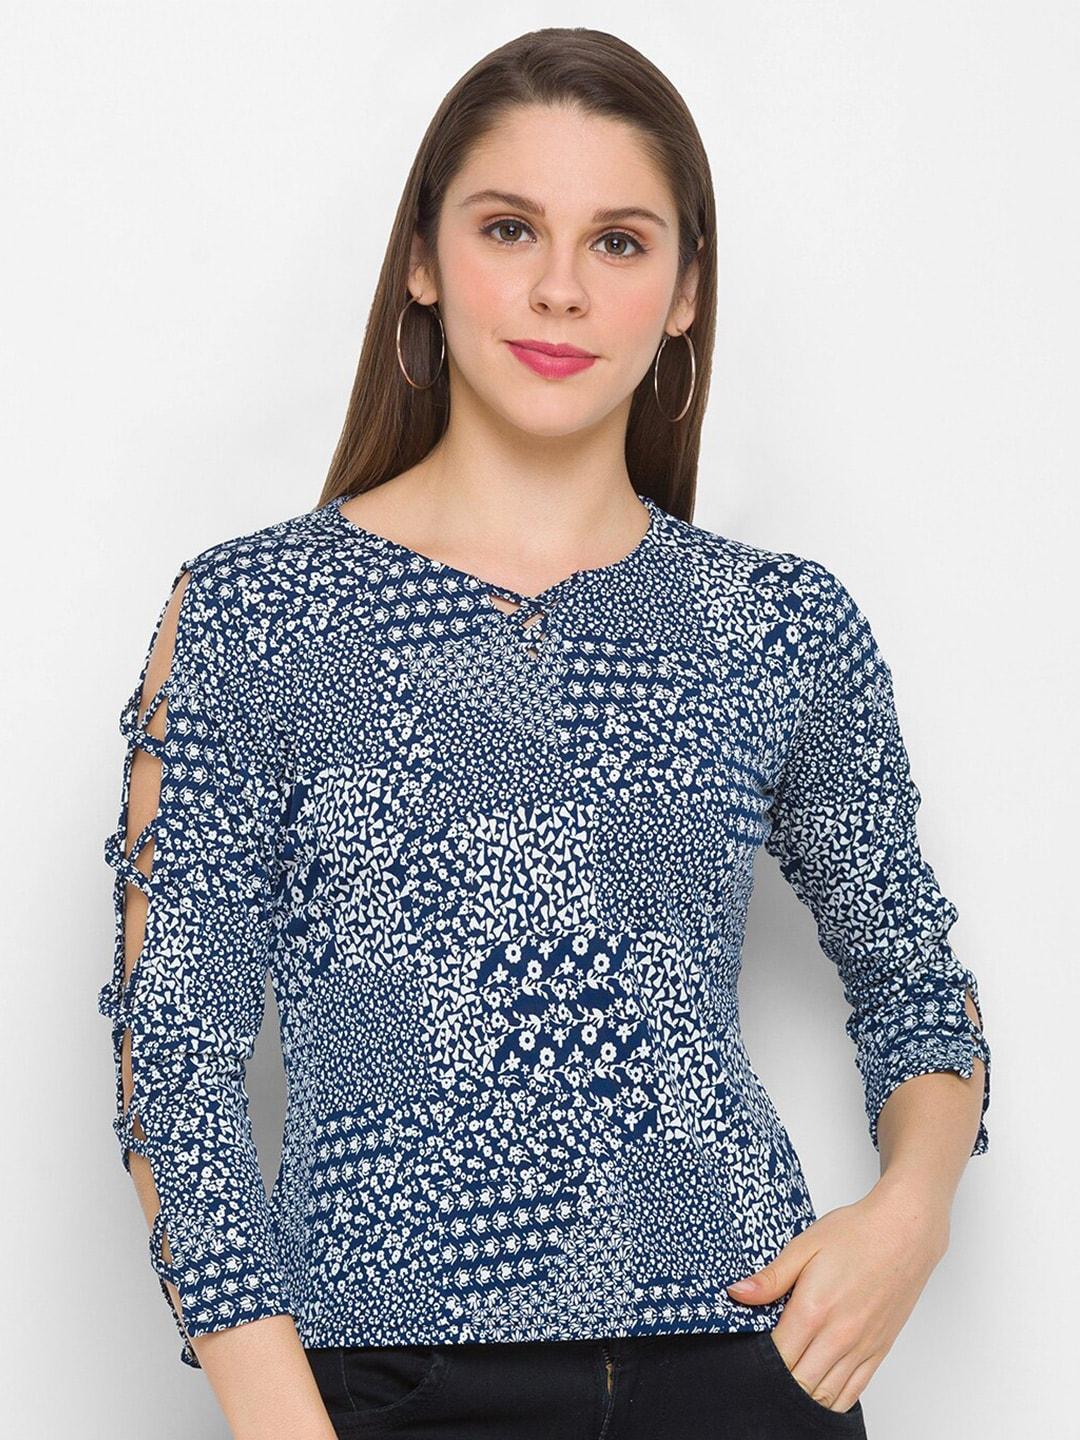 Globus Navy Blue & White Ditsy Floral Print Top